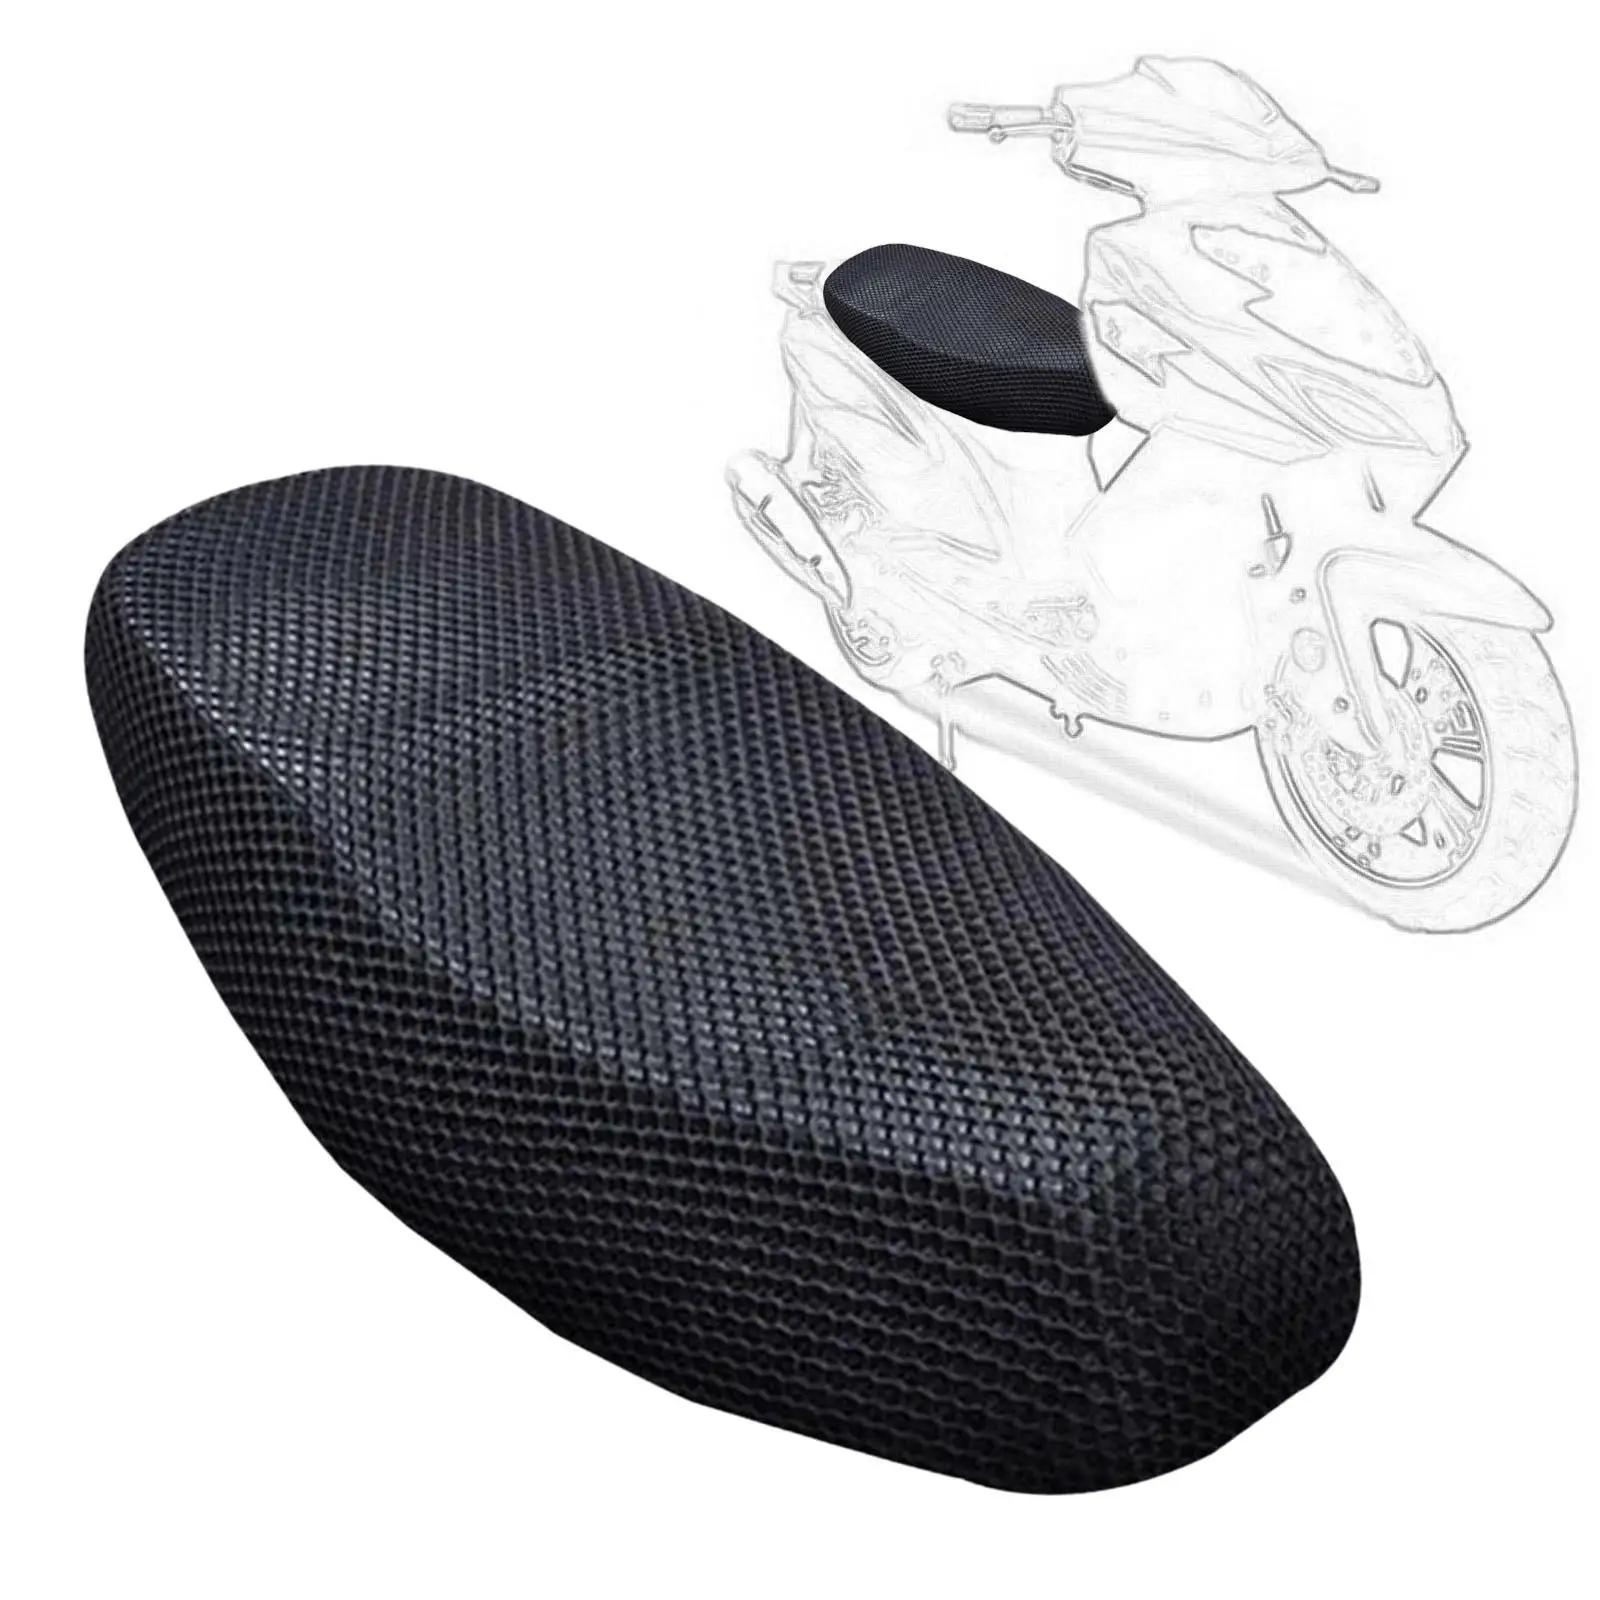 

Motorcycle Seat Mesh Cover Comfortable Replacement Heat Resistance Accessories Universal Thicken Nonskid Motor Seat Pad Cover